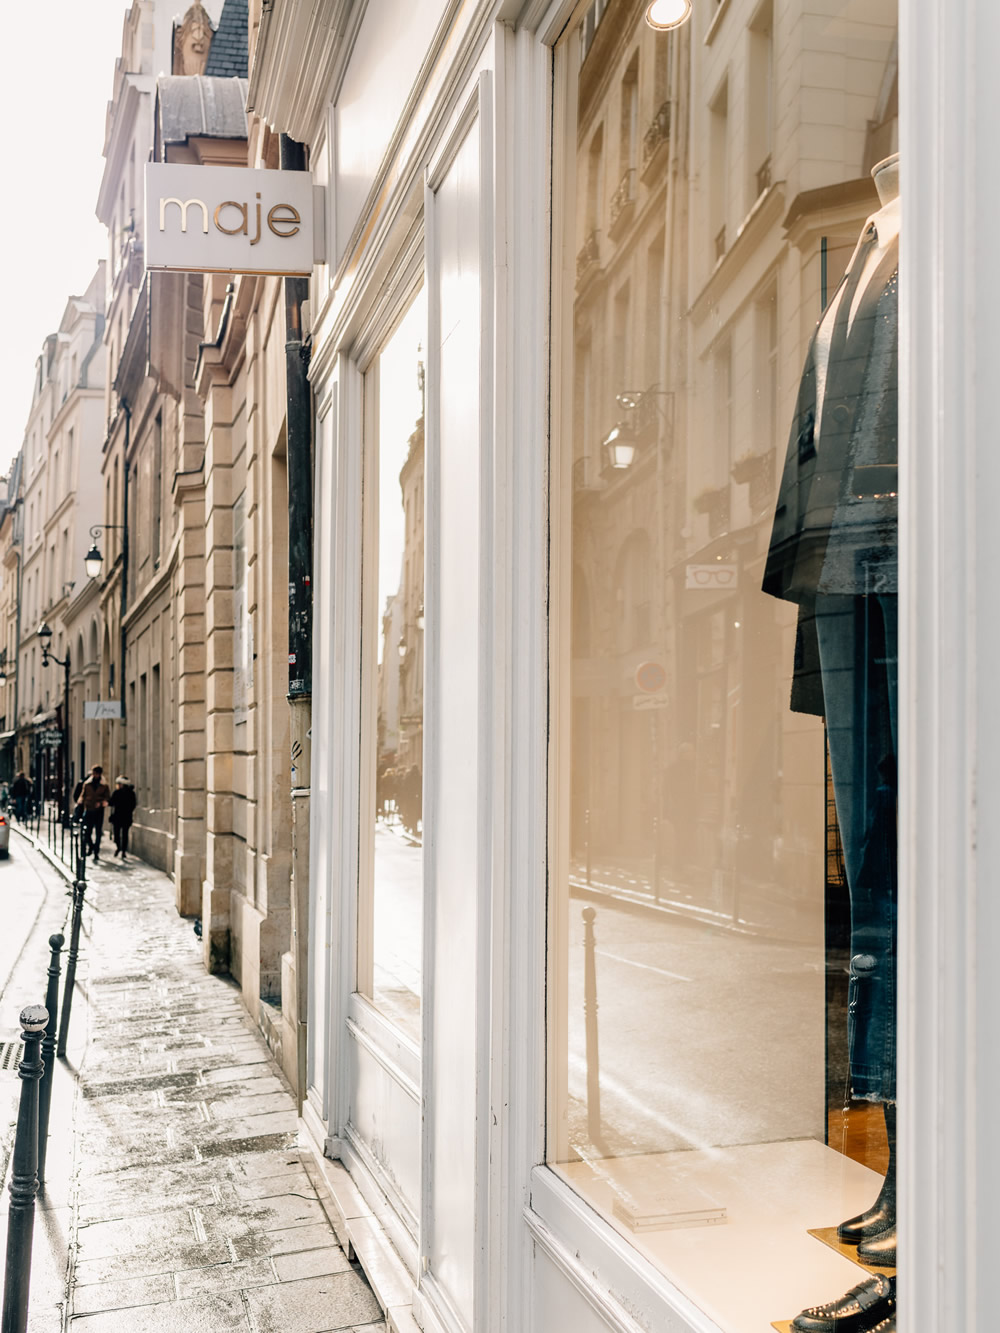 French fashion brands in Paris